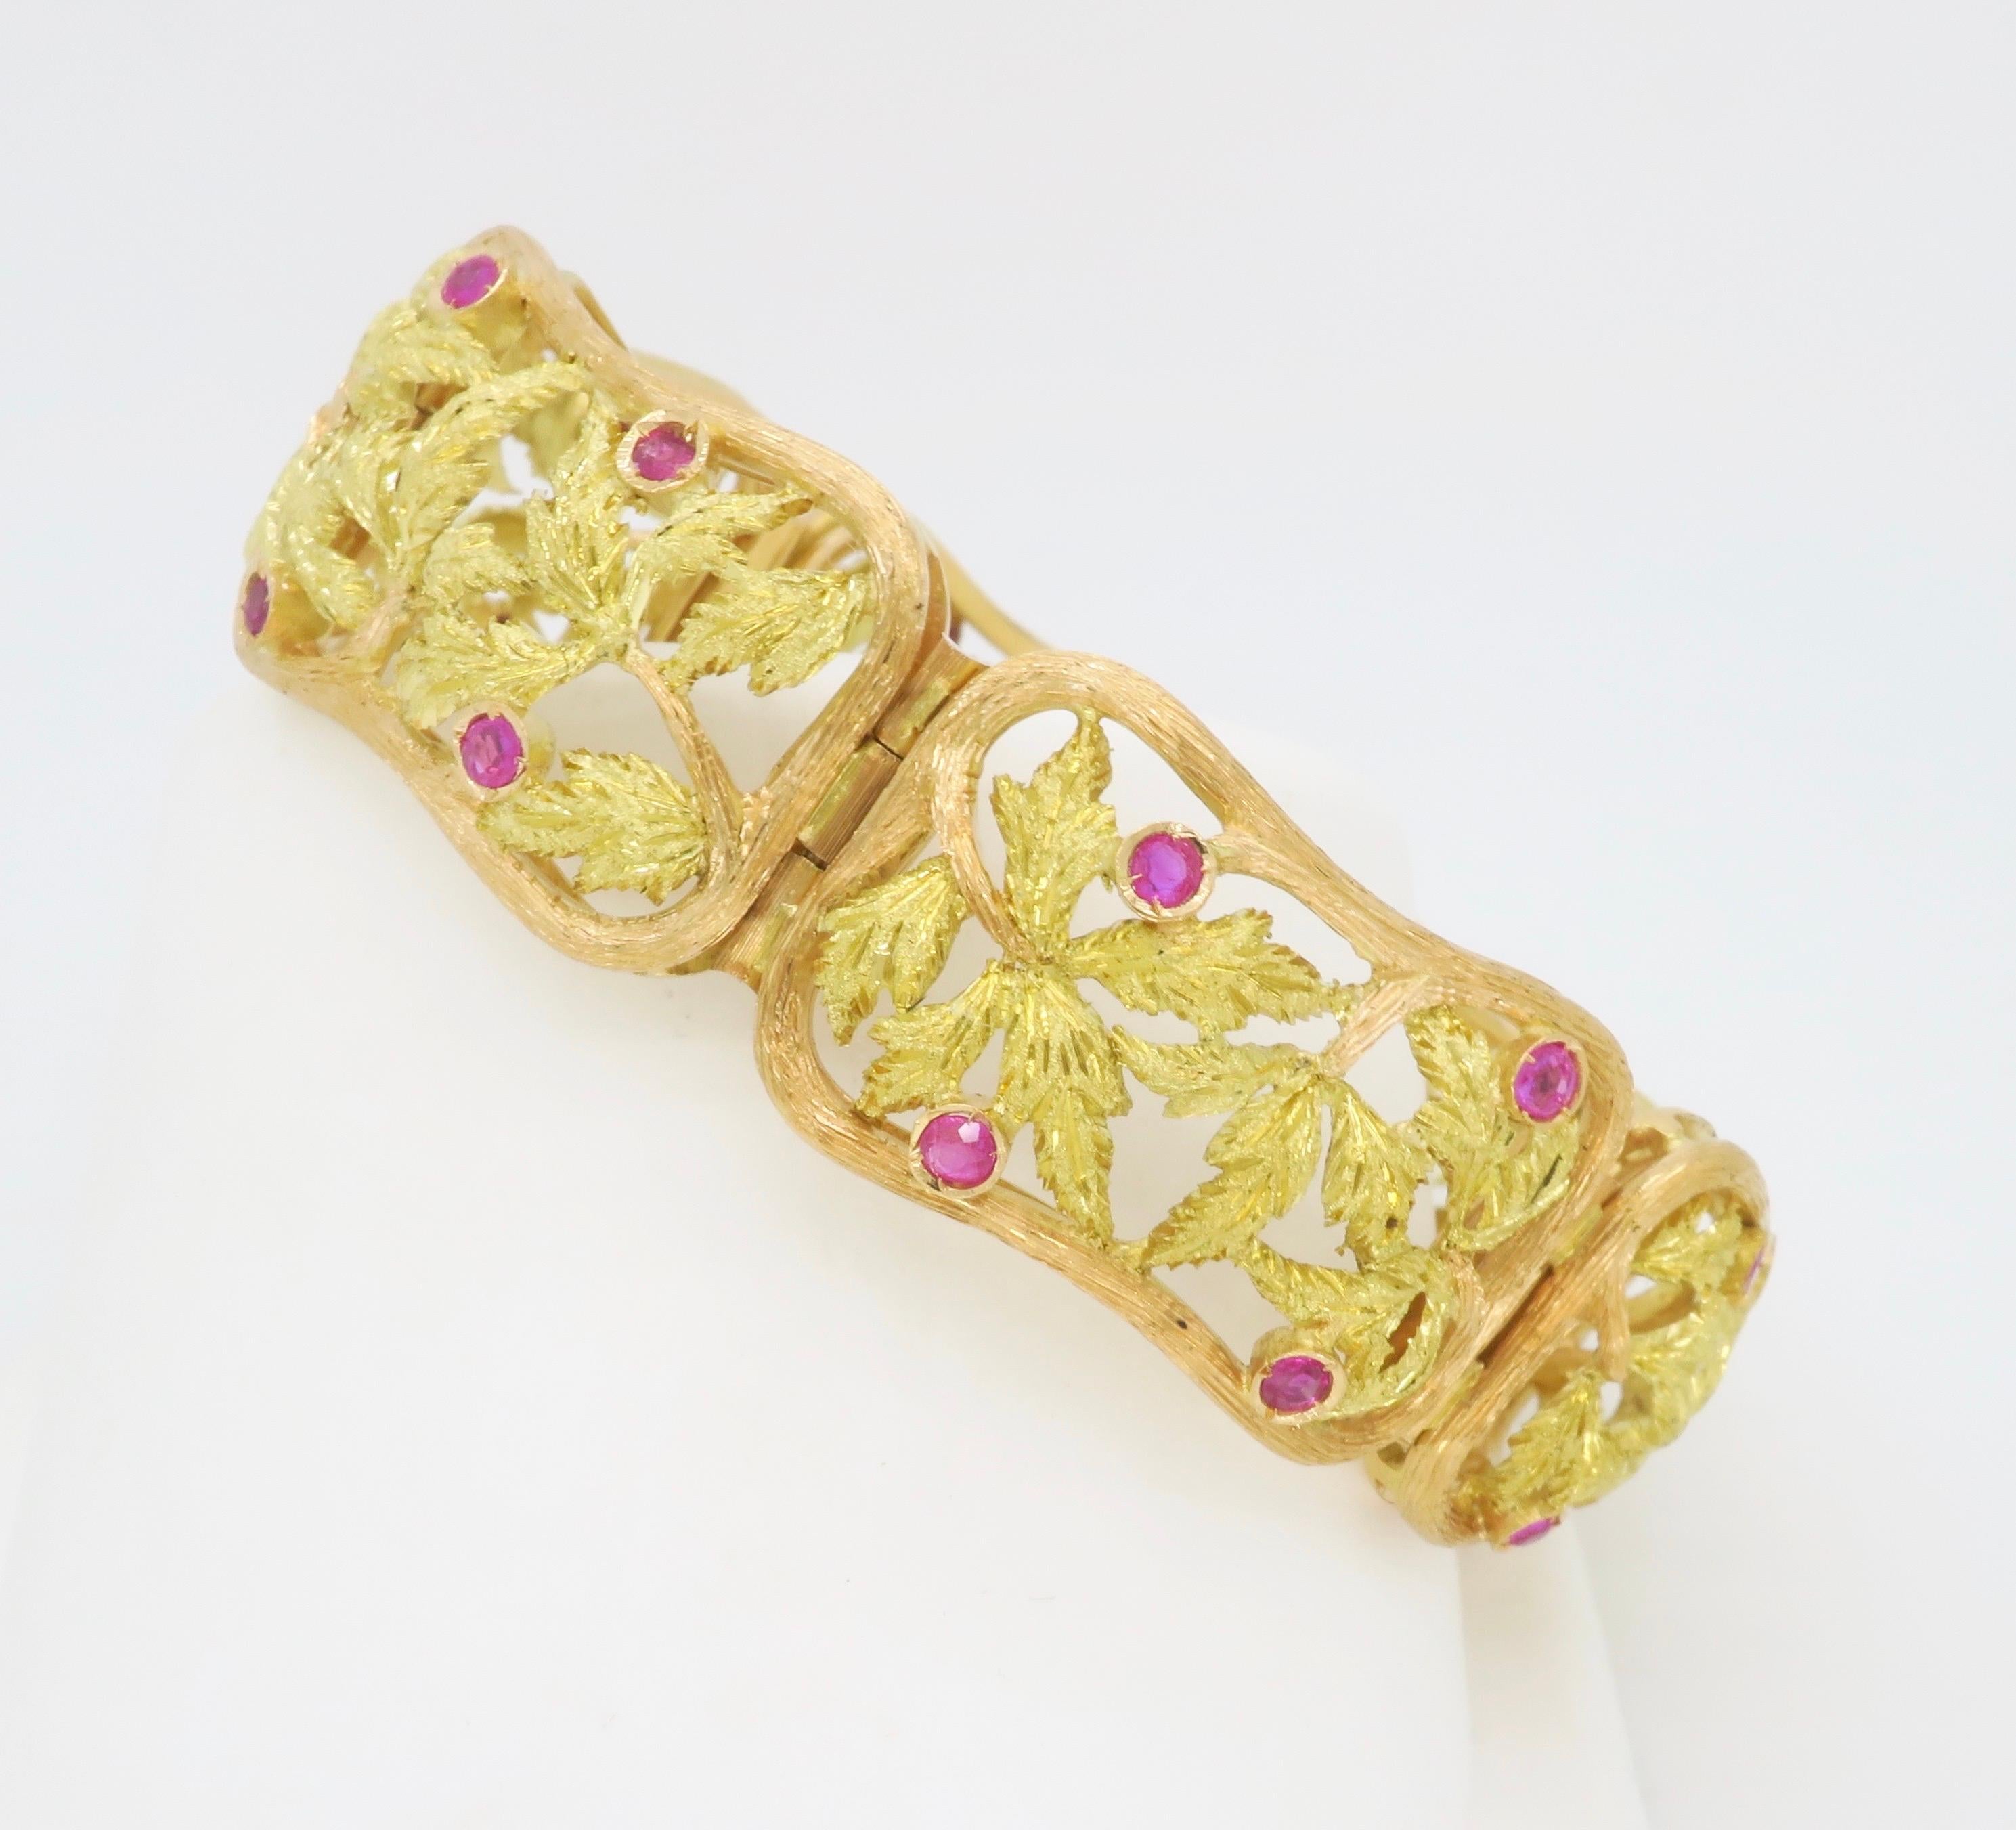 Impressive Yellow & Green Gold Bracelet Crafted with Rubies 6